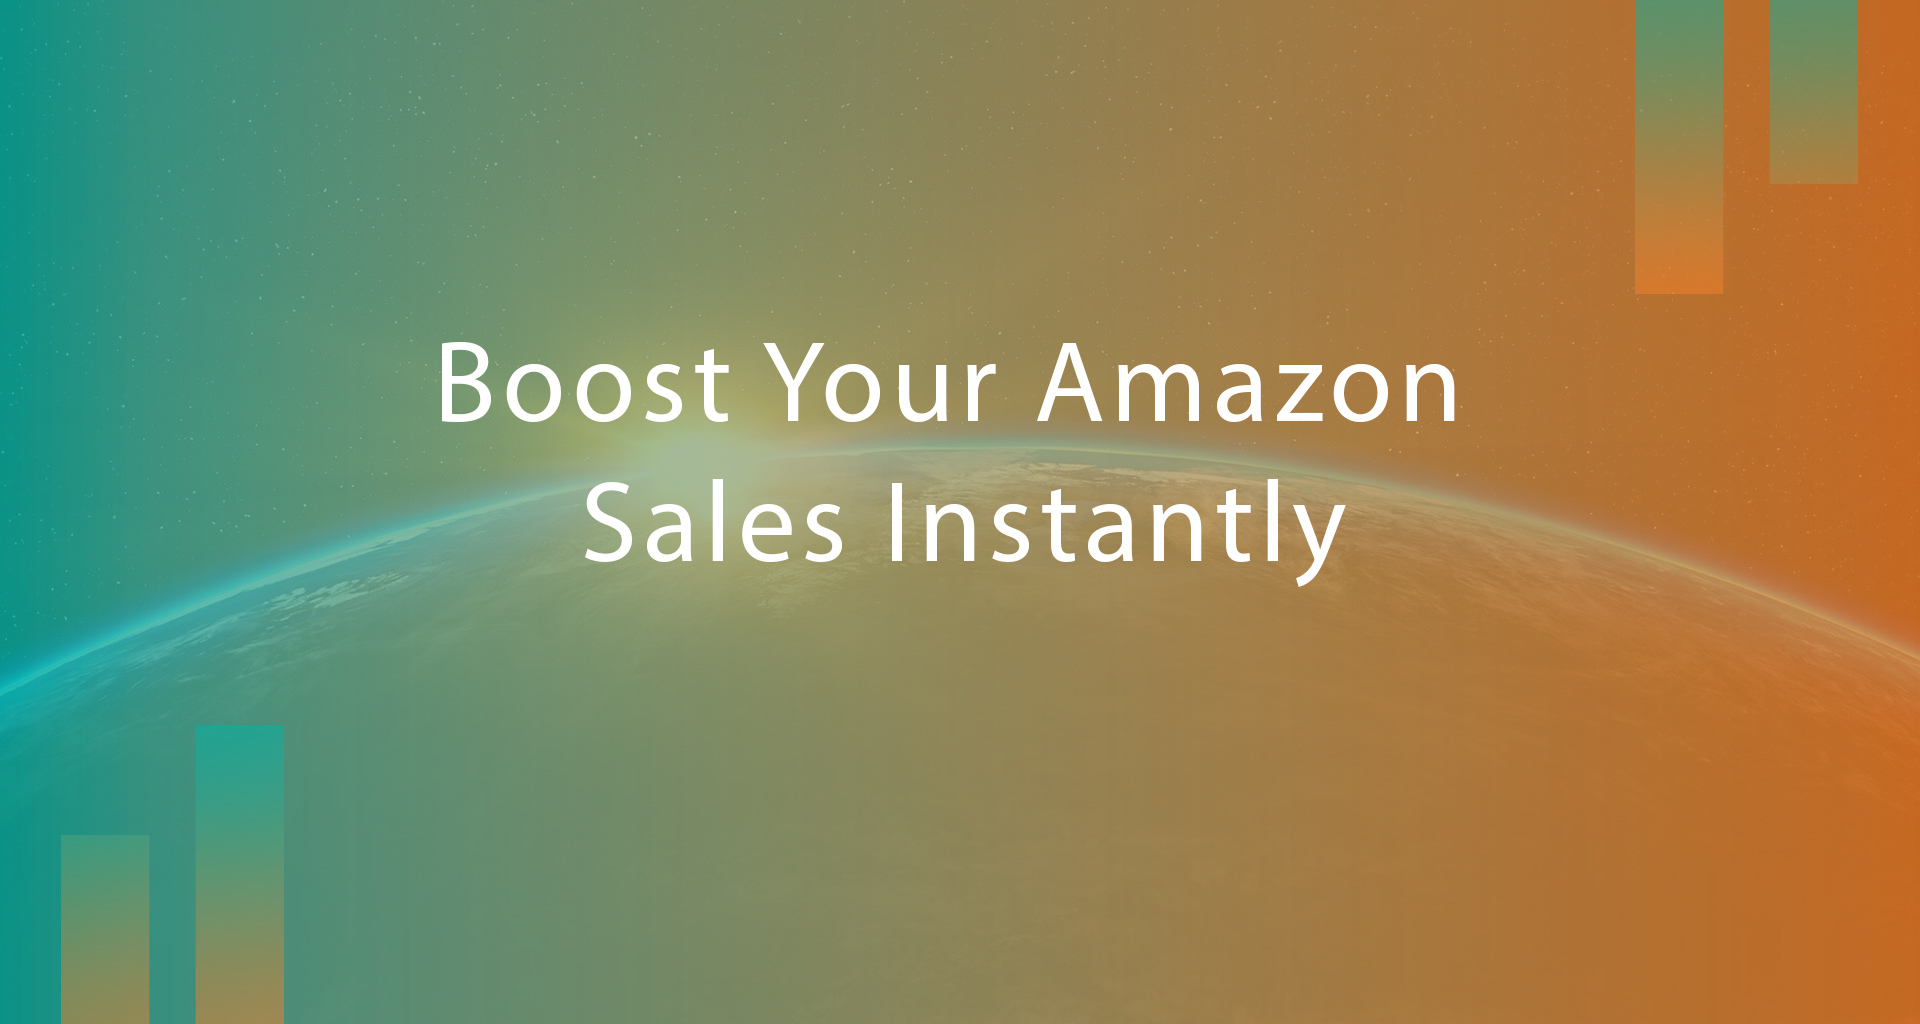 5 WAYS TO BOOST YOUR AMAZON SALES INSTANTLY!